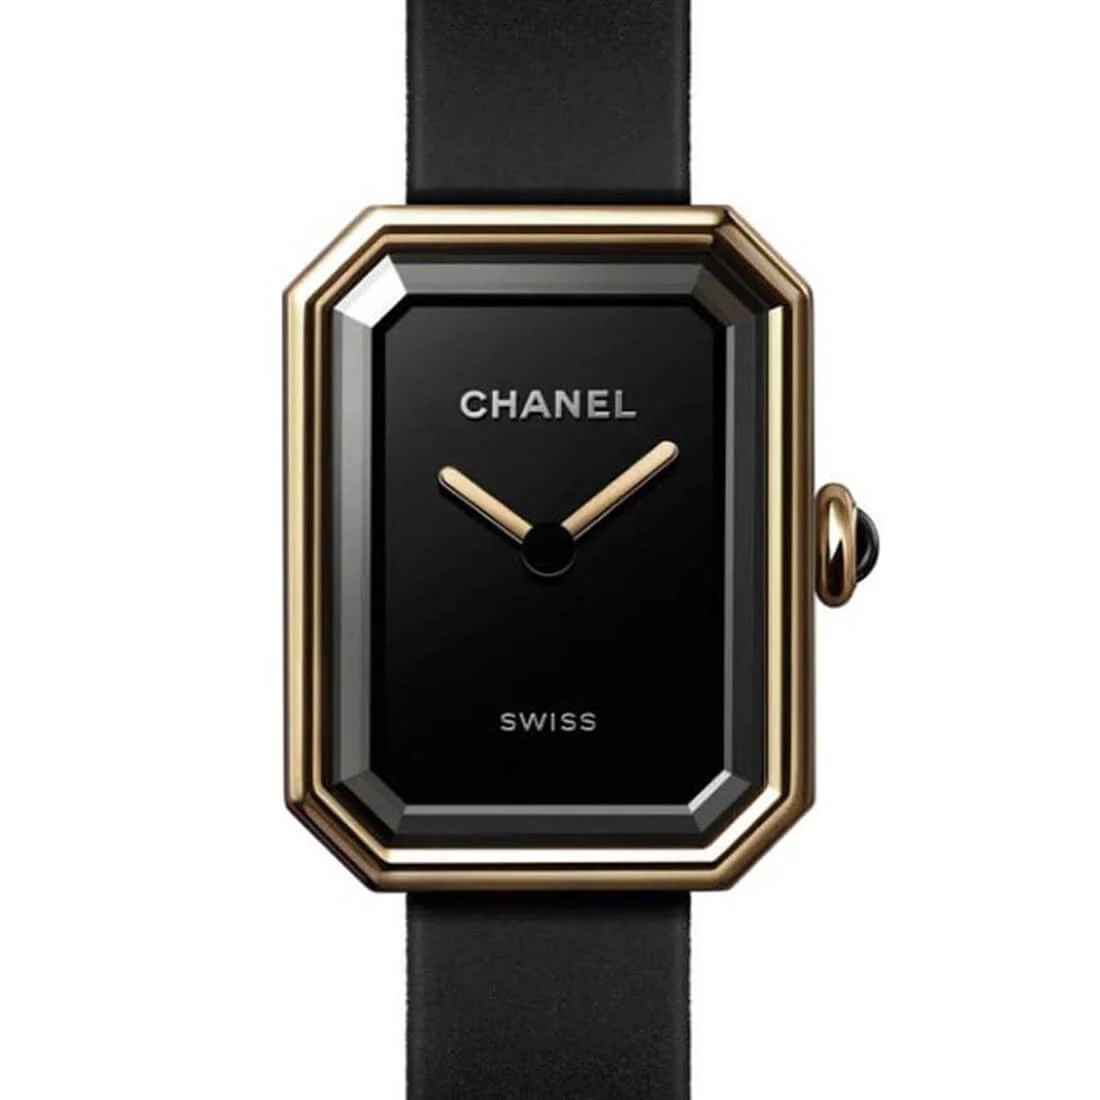 Buy the latest luxury watches from Chanel now!